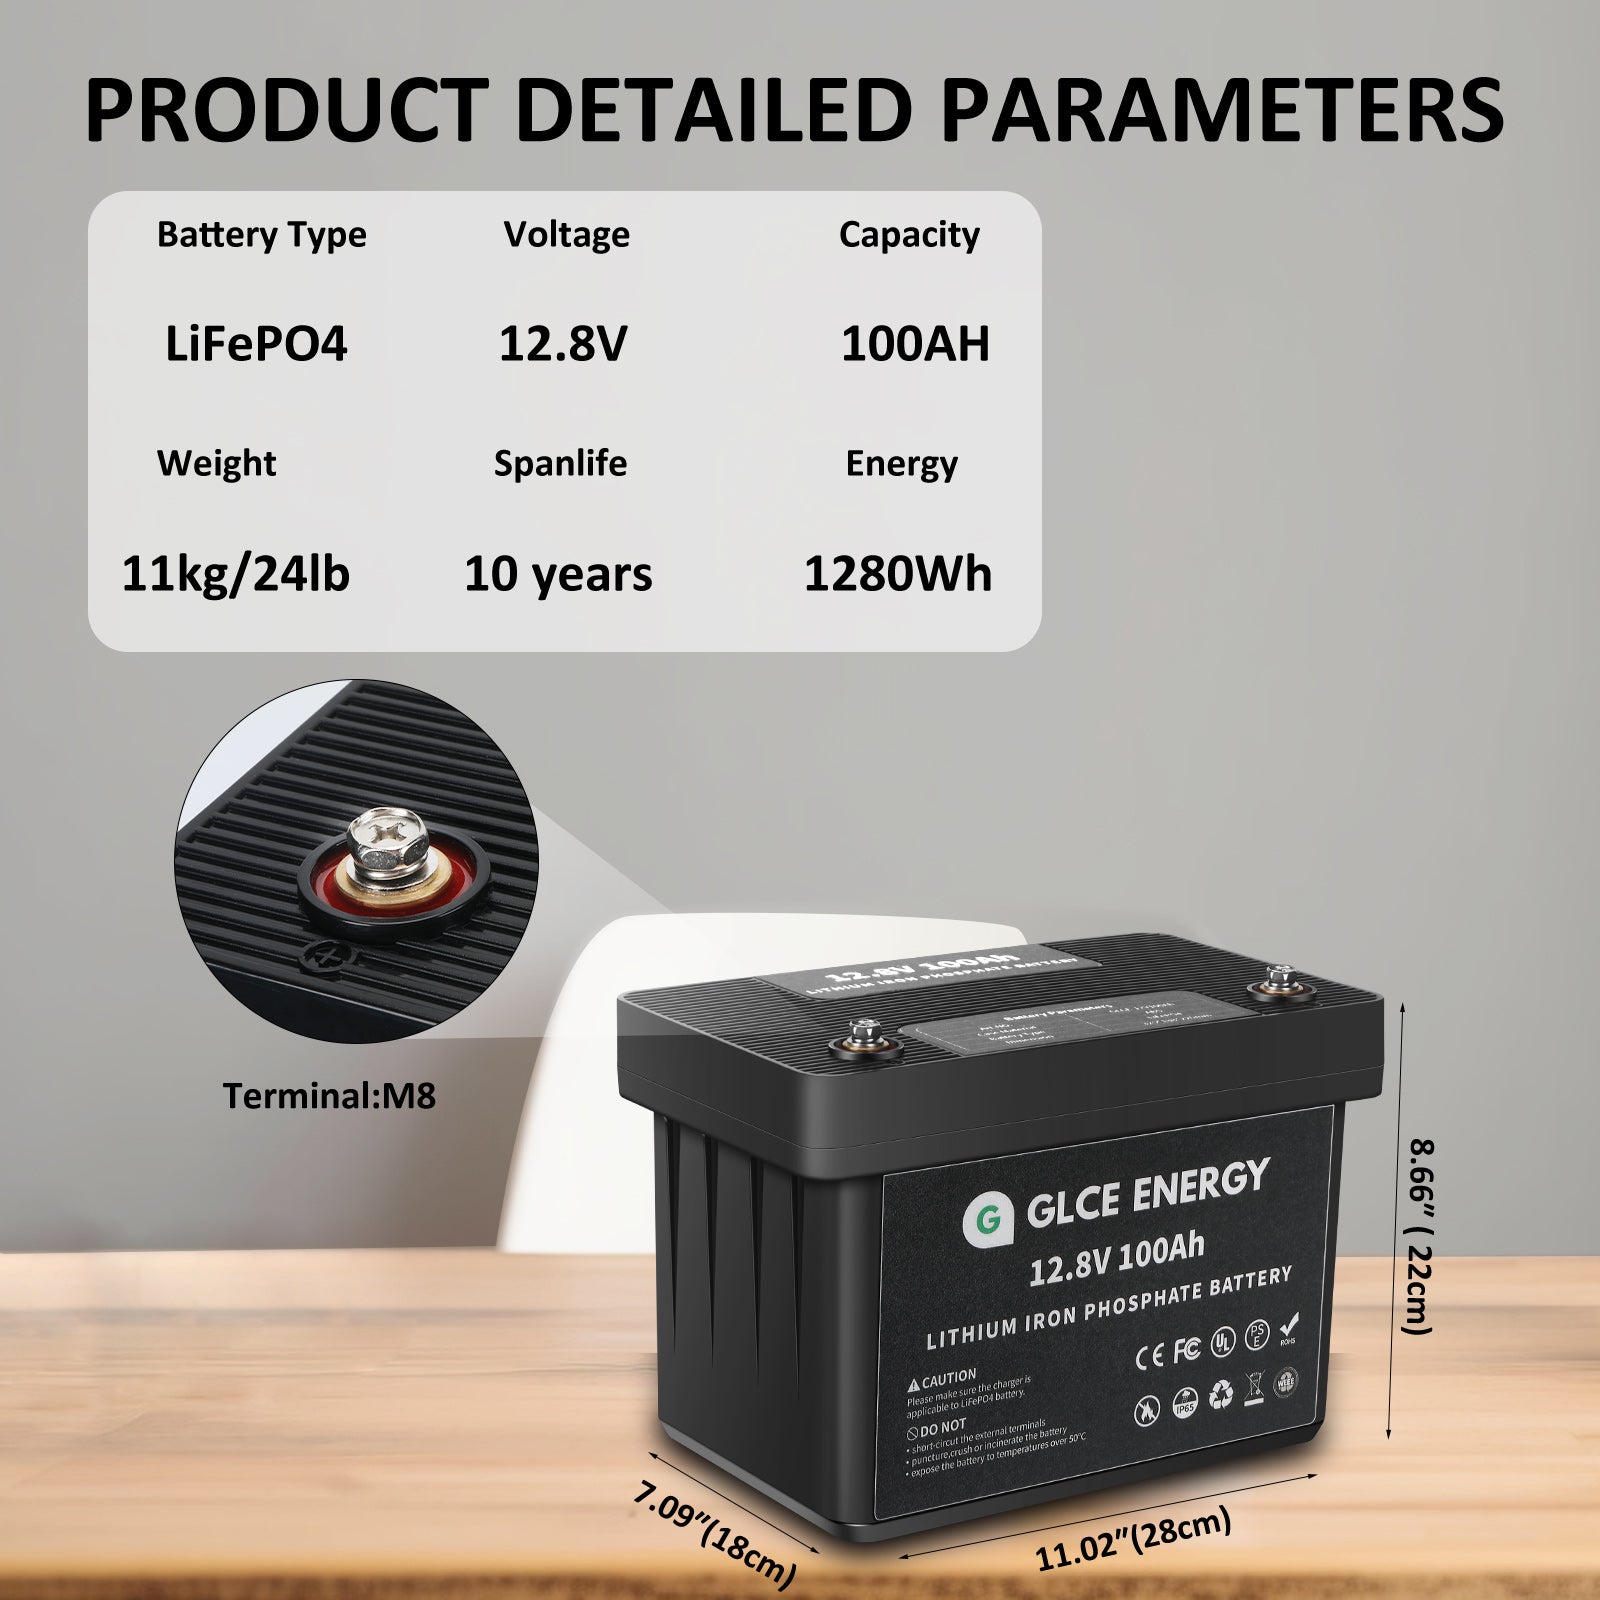 LiFePO4 Battery Detailed Parameters